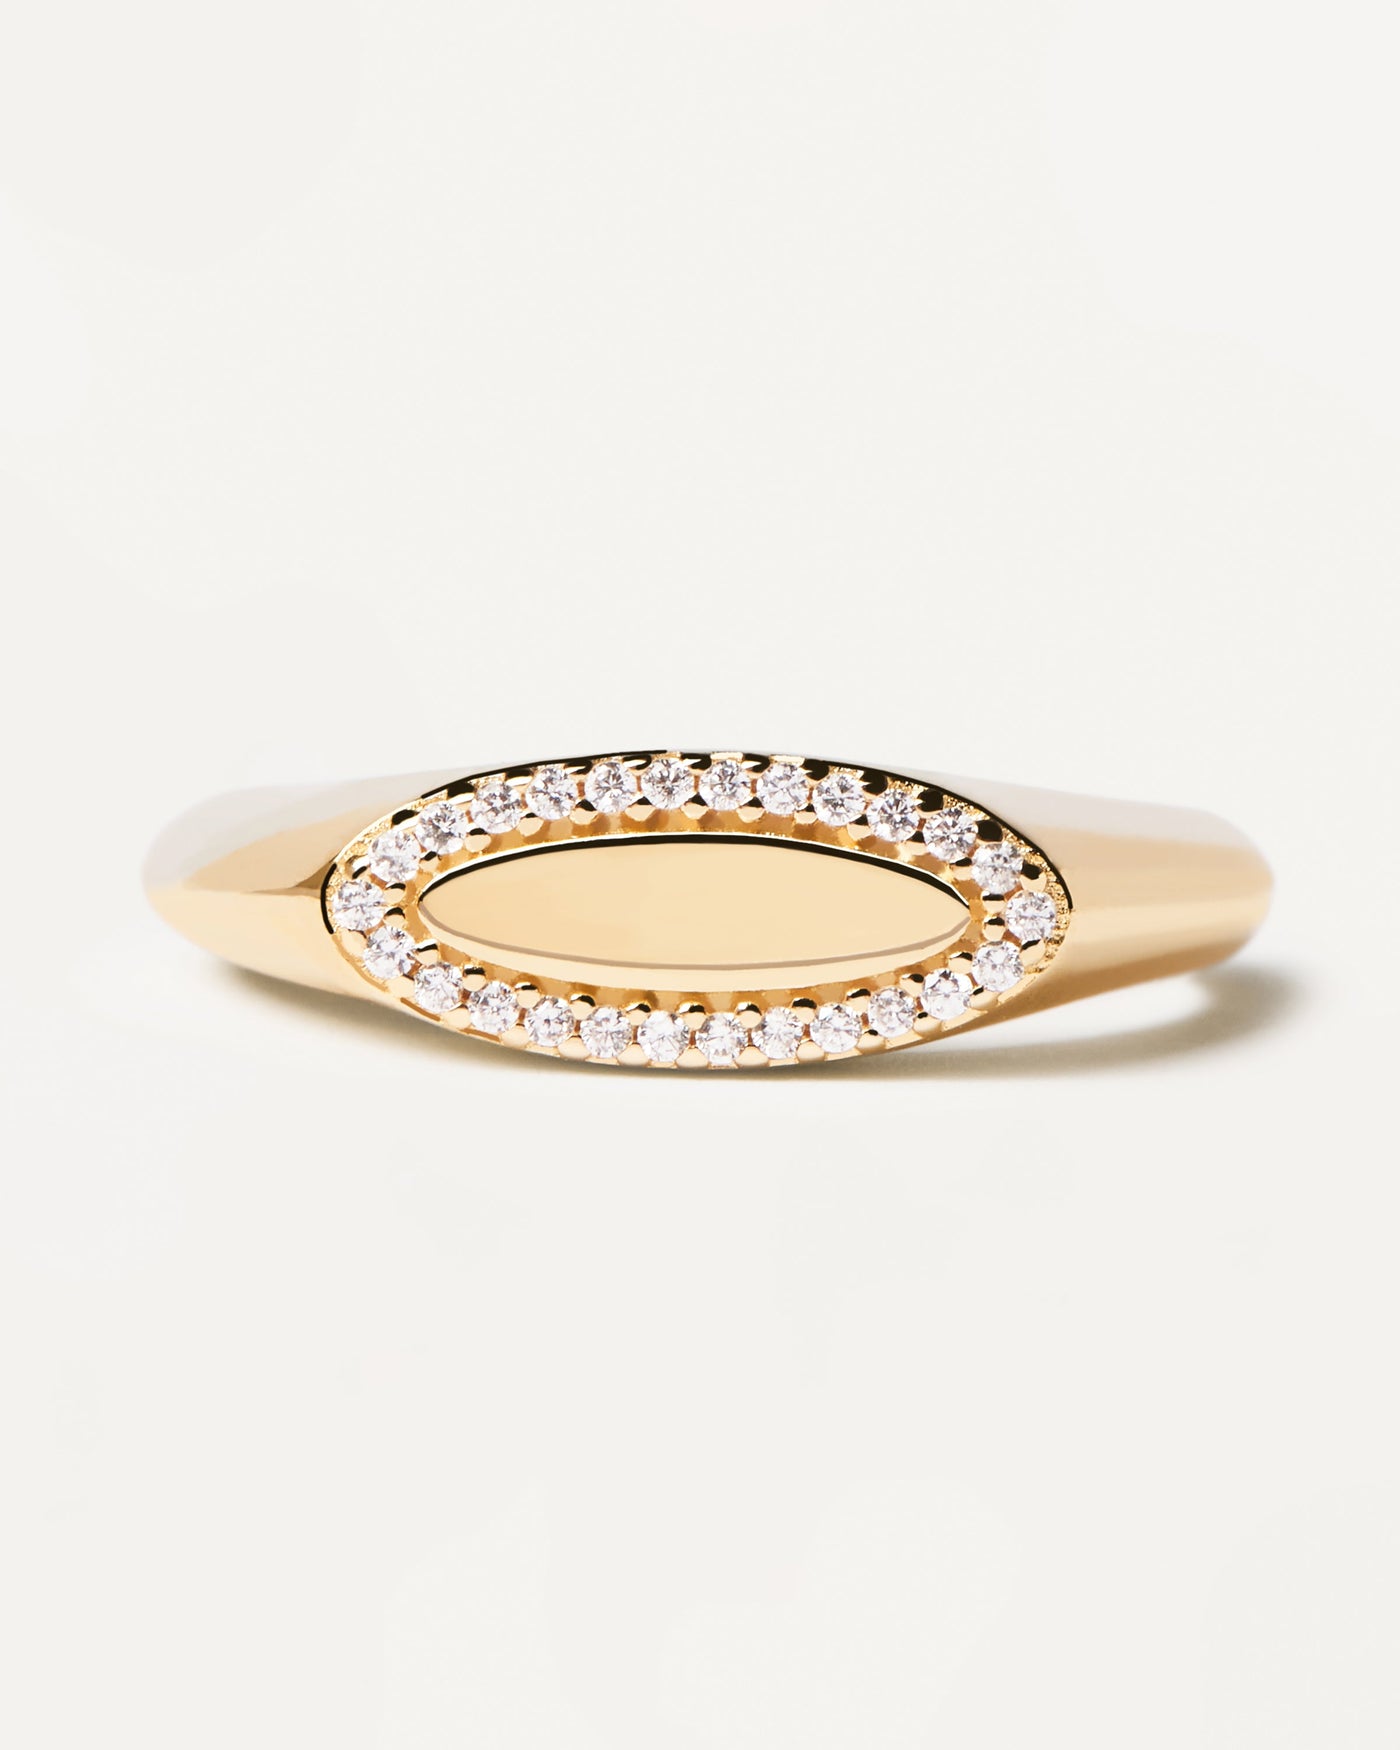 2023 Selection | Lace Stamp Ring. Engravable ovalish signet ring in gold-plated and white zirconia. Get the latest arrival from PDPAOLA. Place your order safely and get this Best Seller. Free Shipping.